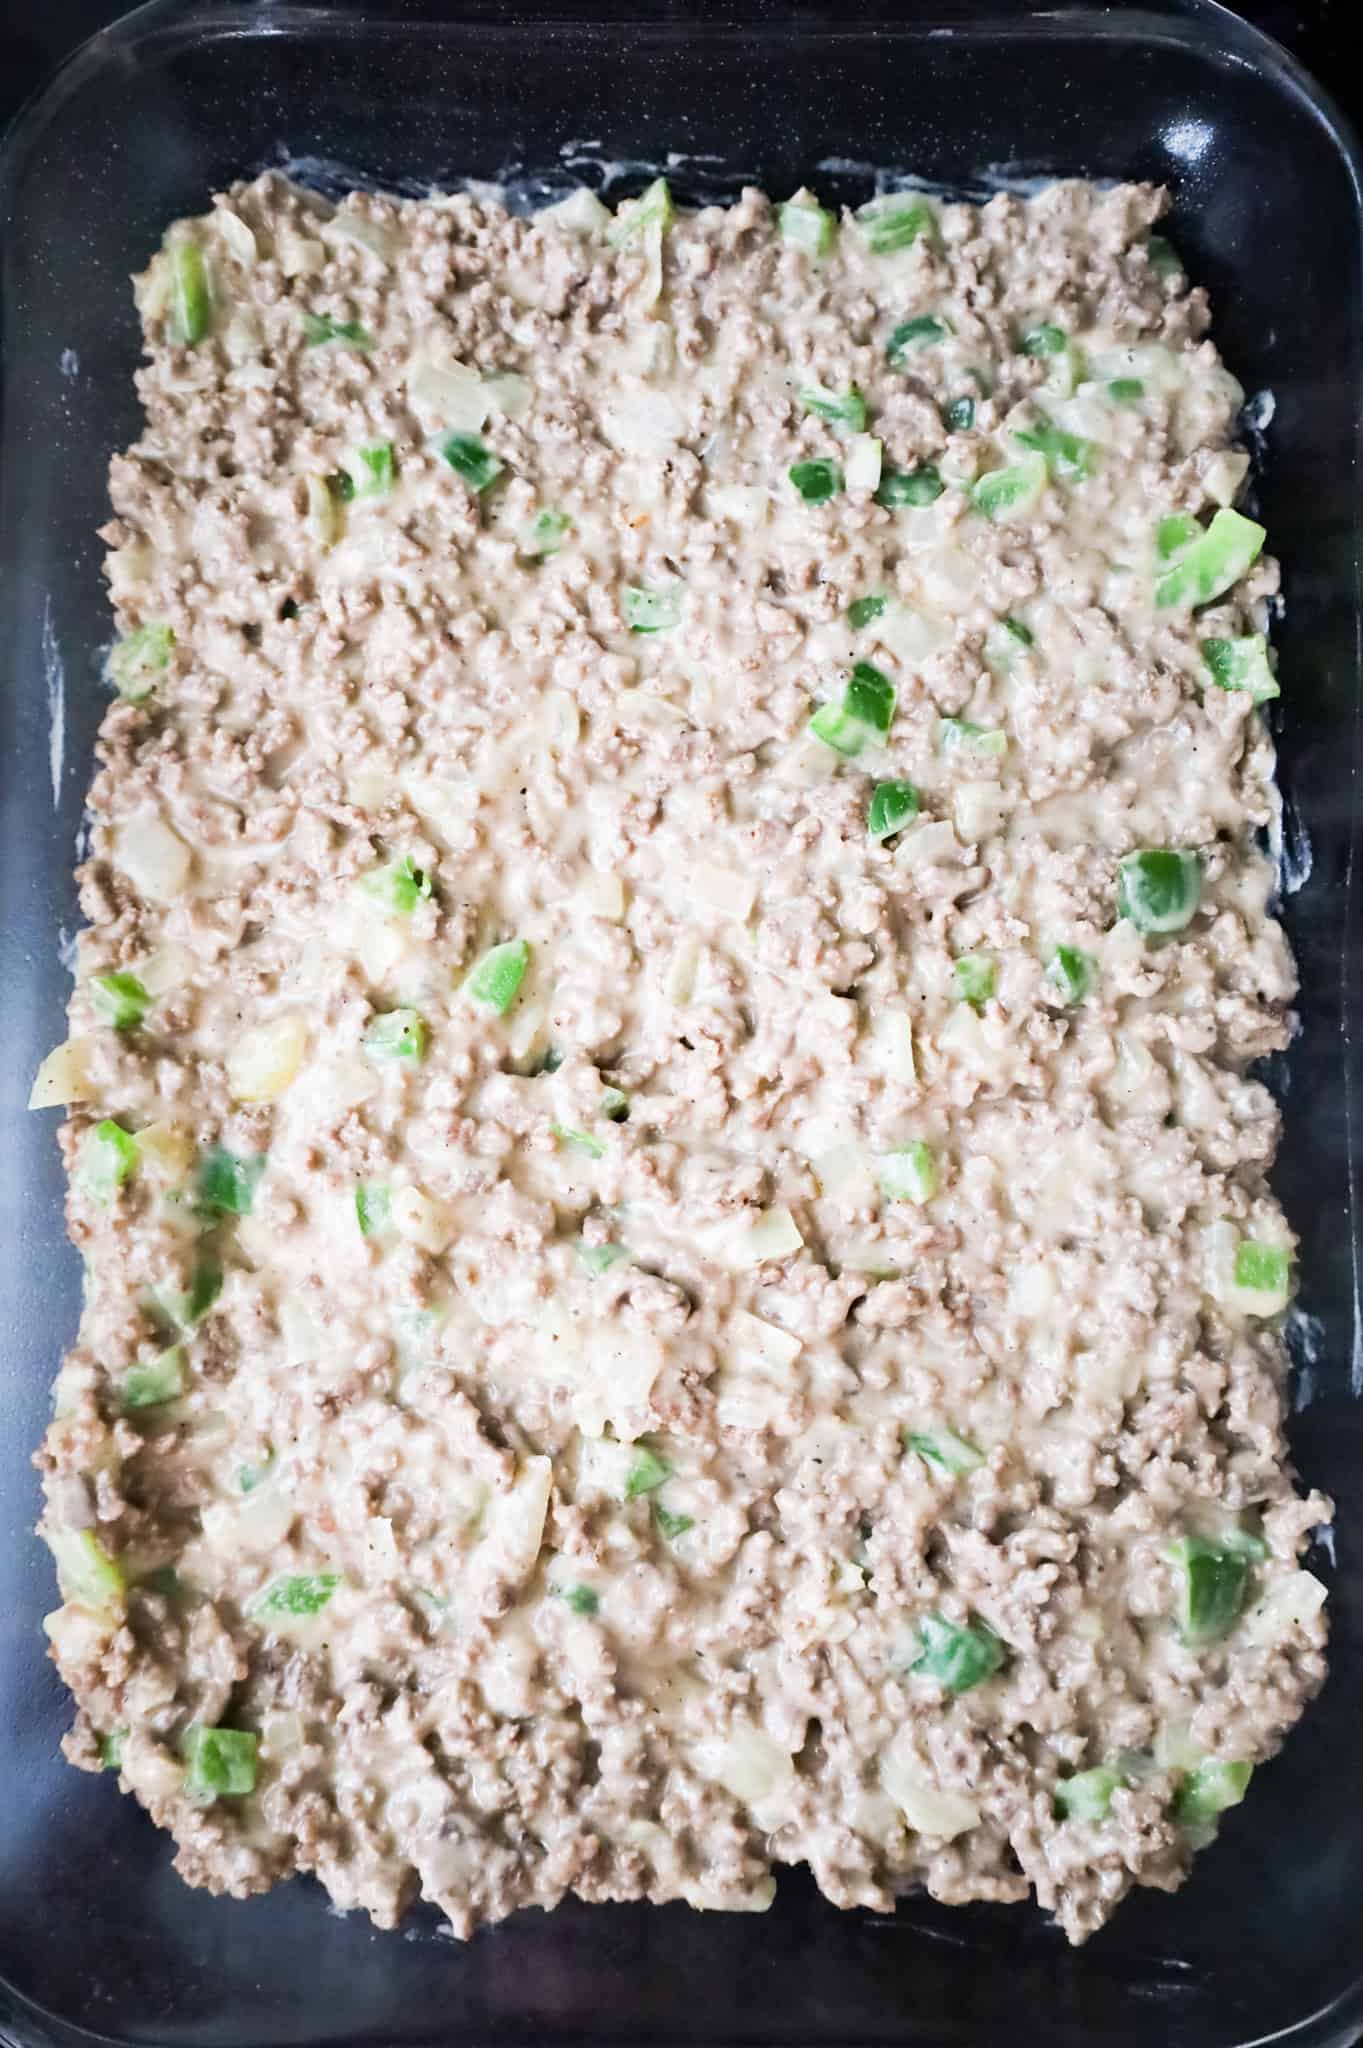 ground beef and cream of mushroom soup mixture in a baking dish